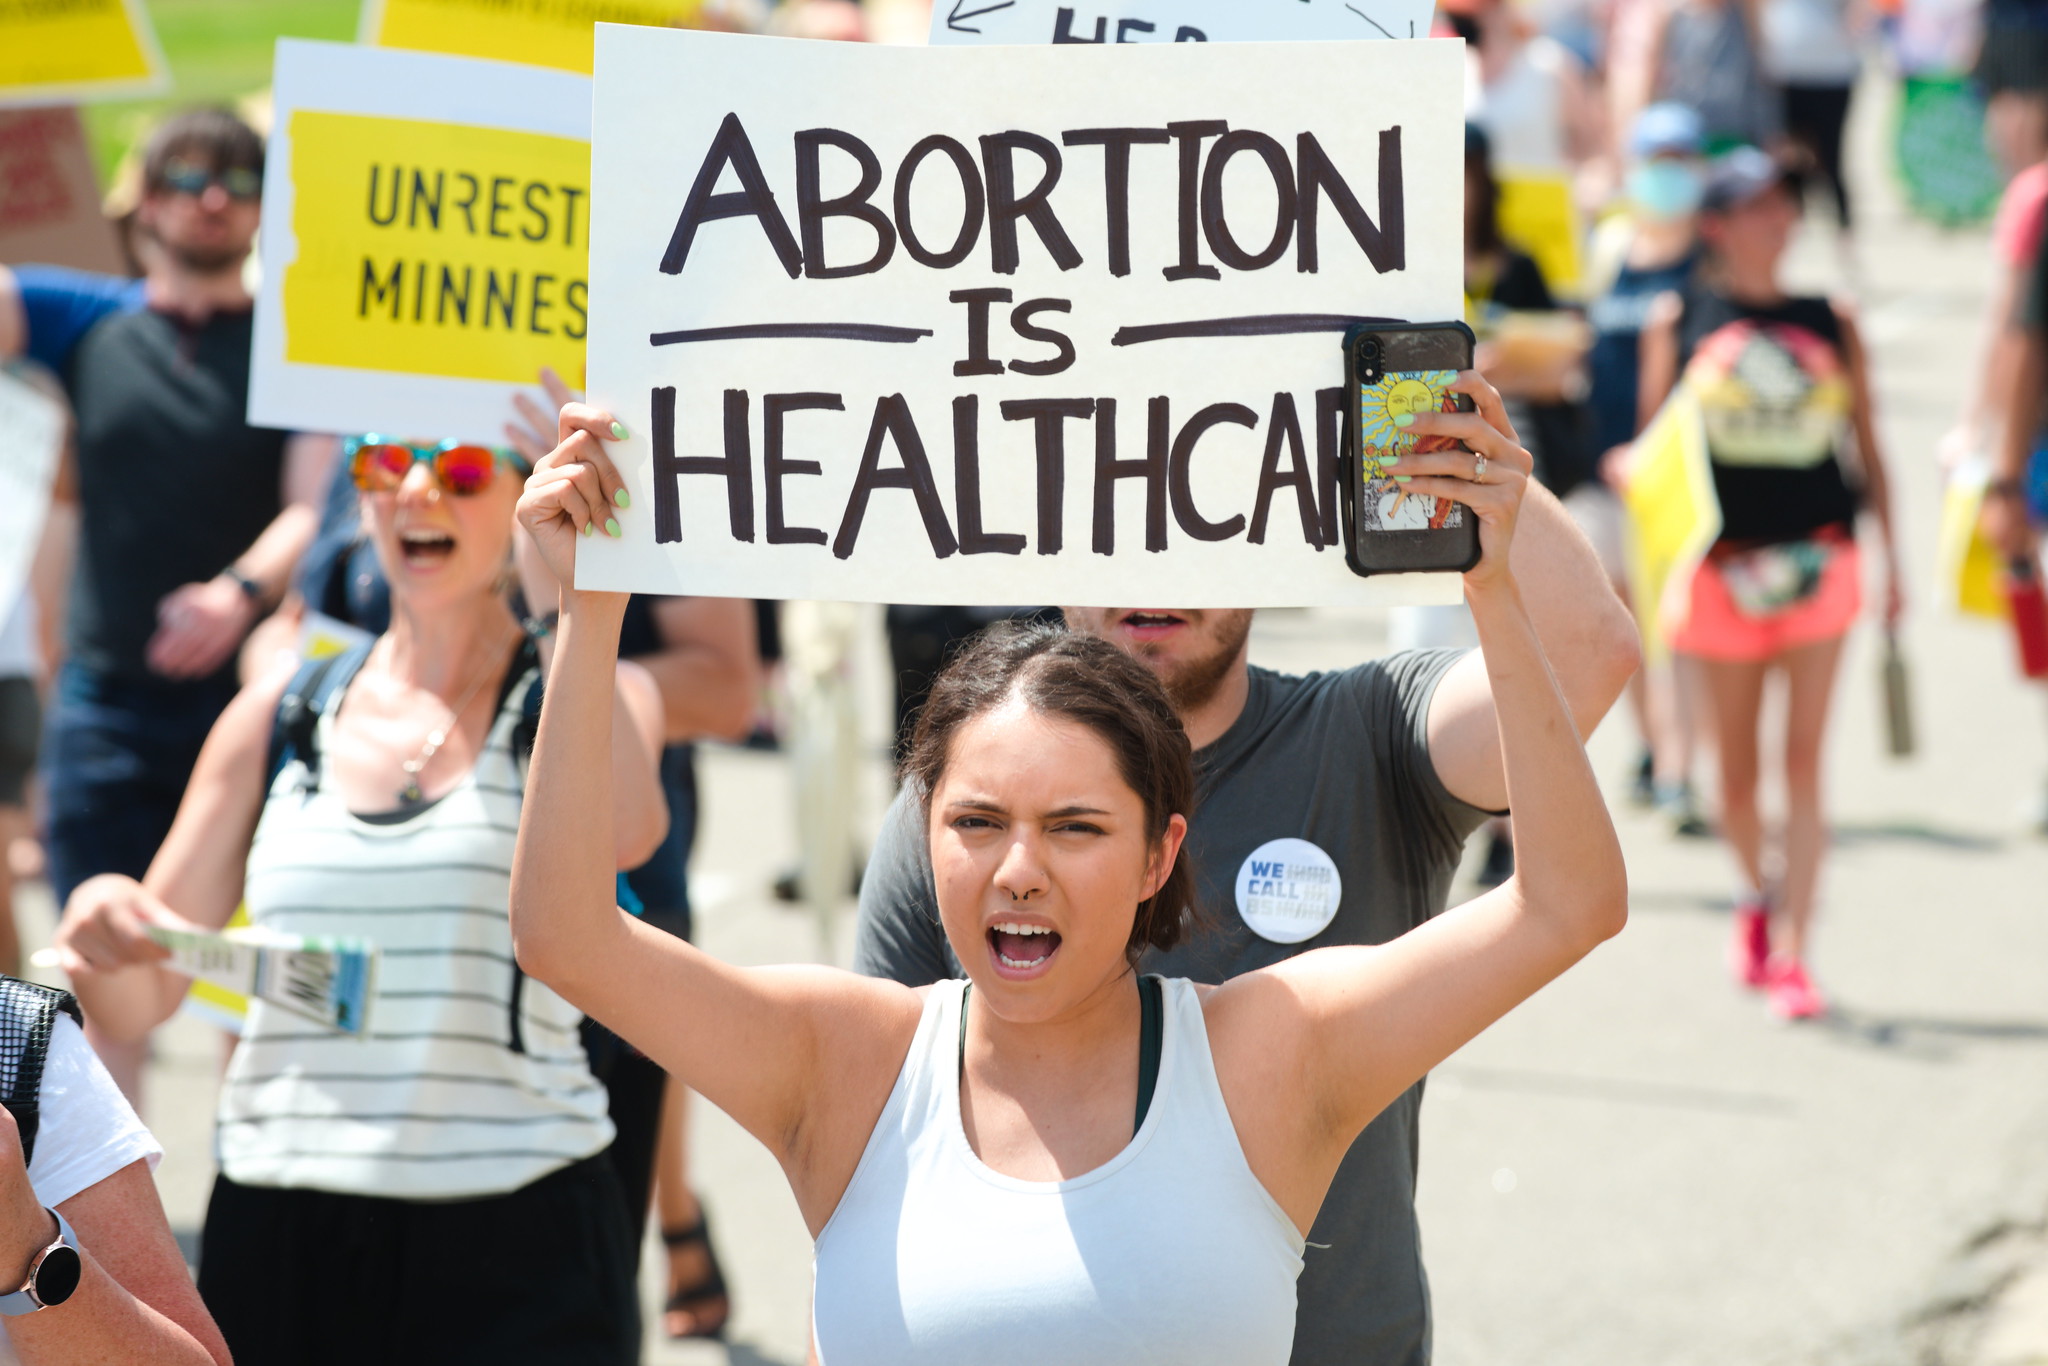 a person holds an "abortion is healthcare" sign during an MN abortion rally